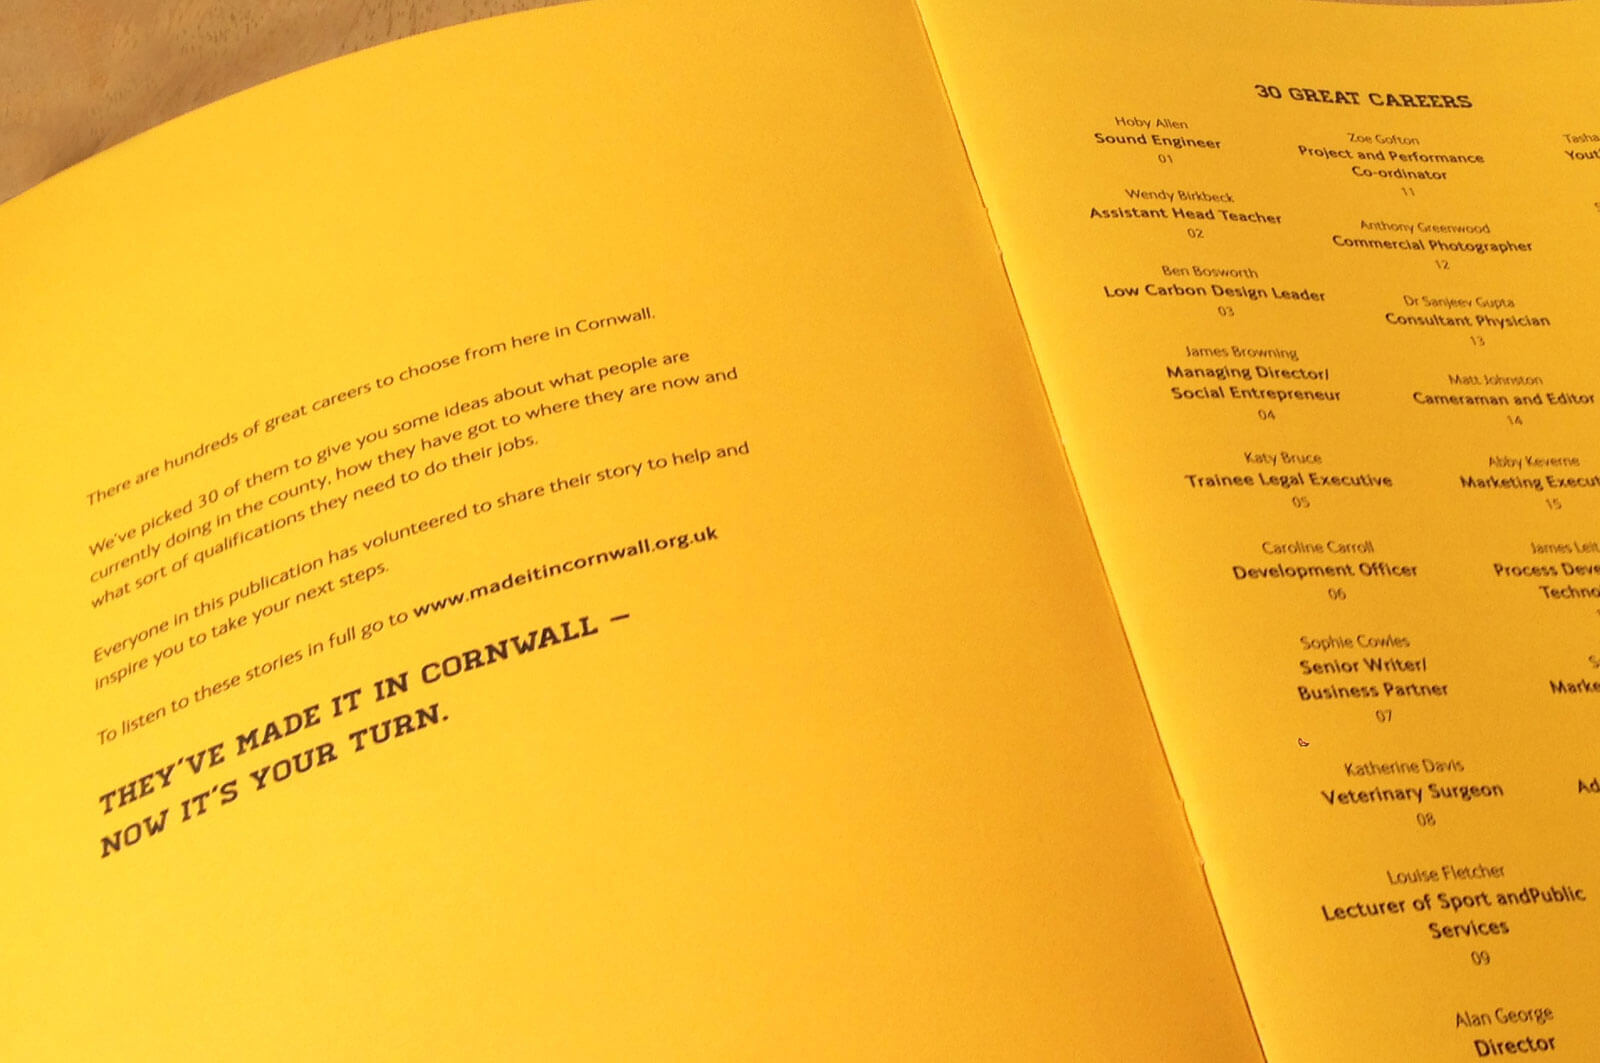 A close-up shot of the inner pages of the 